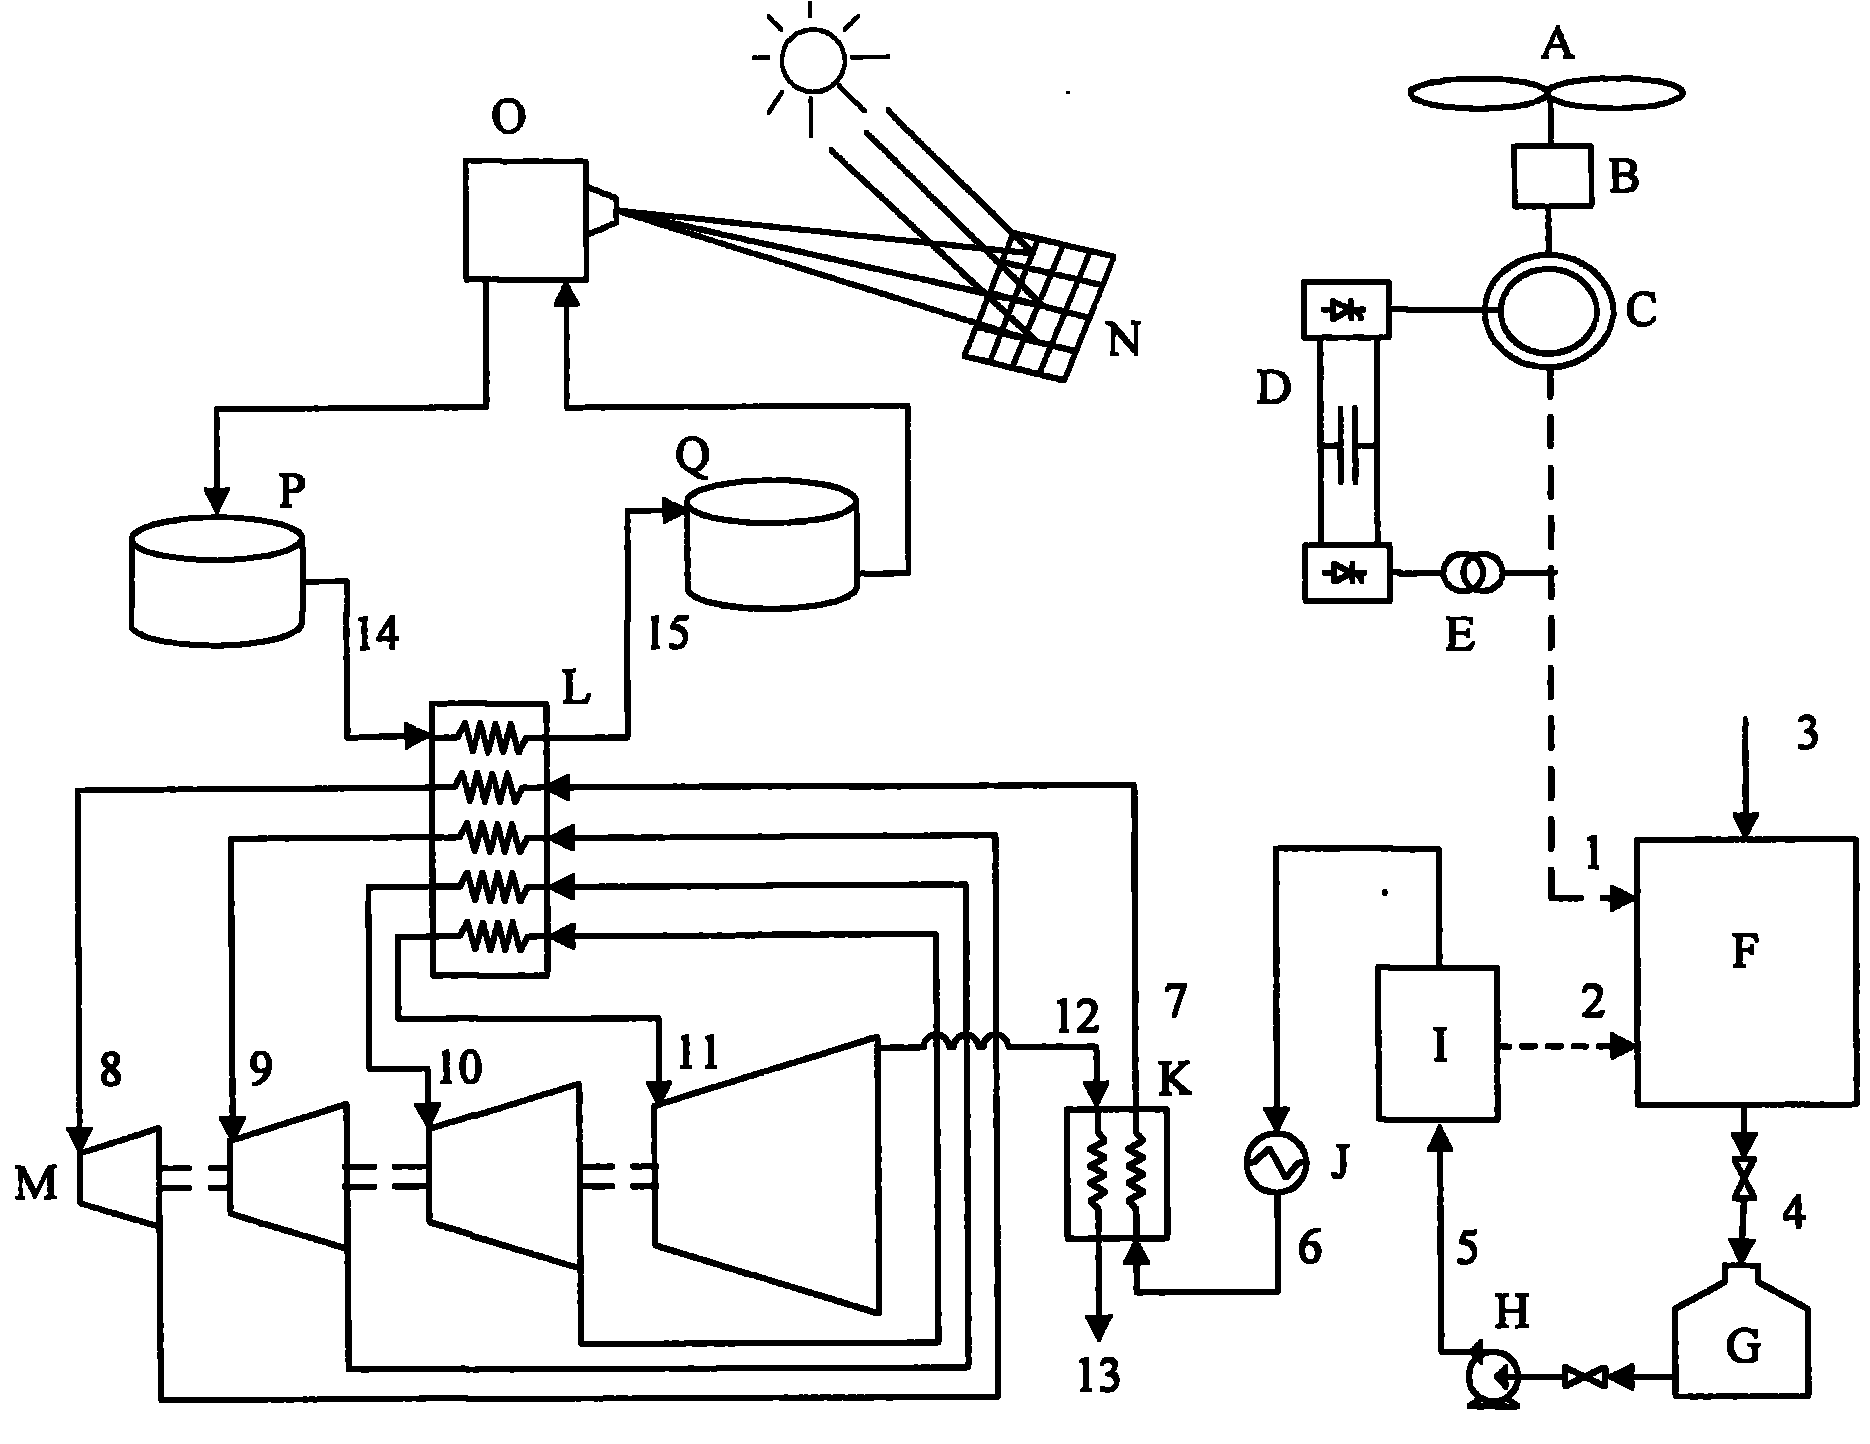 Wind and solar hybrid energy storage and power generation integration system and process